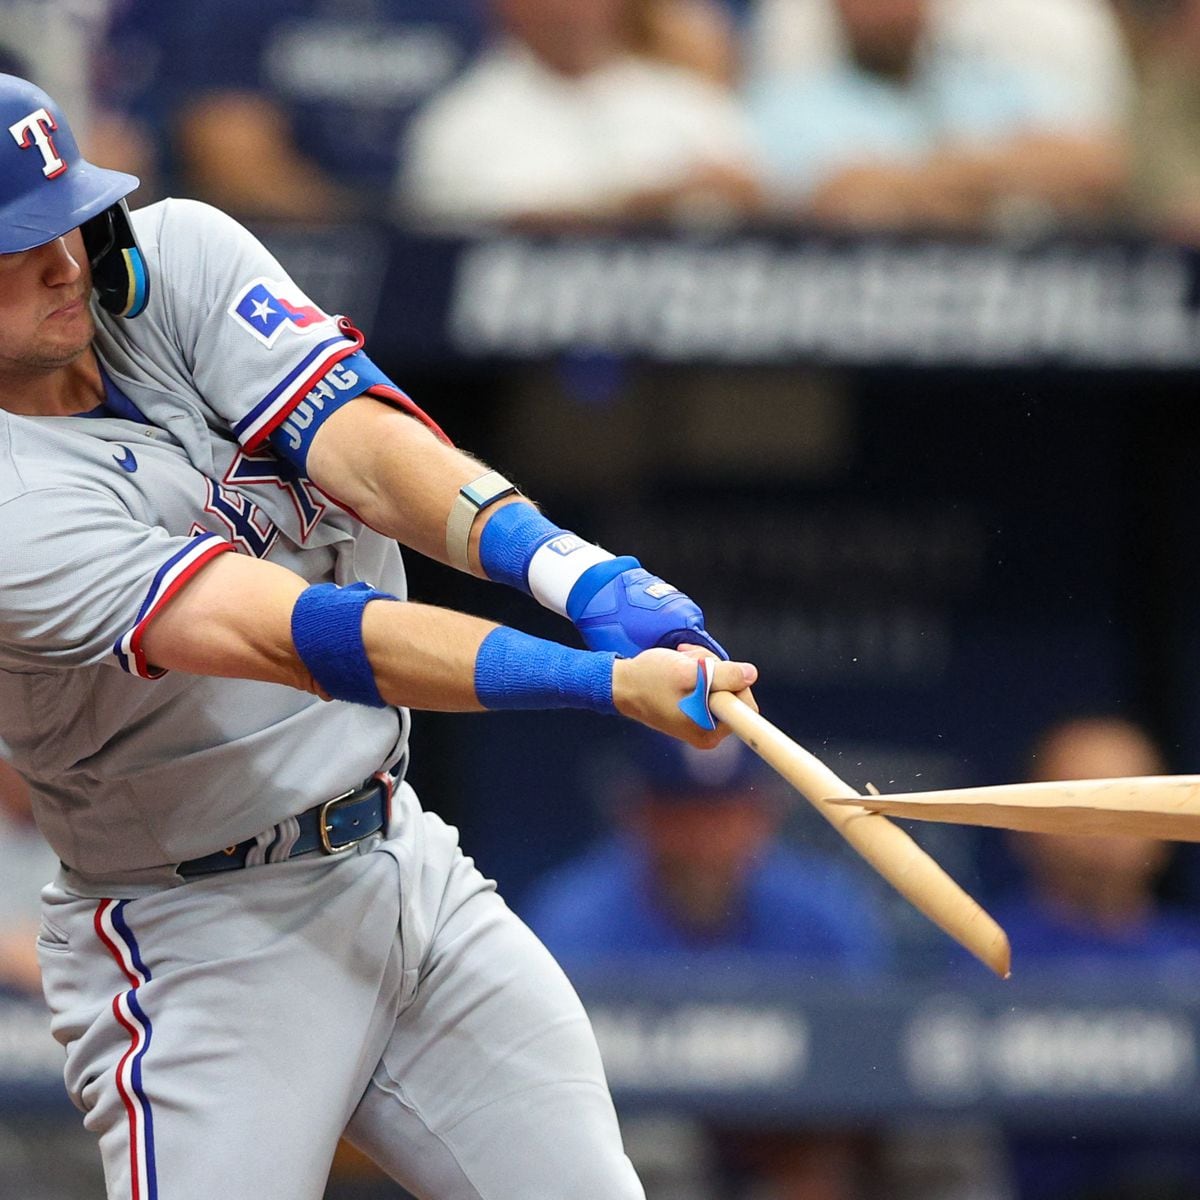 With injuries mounting, Texas Rangers facing test to stay atop AL West